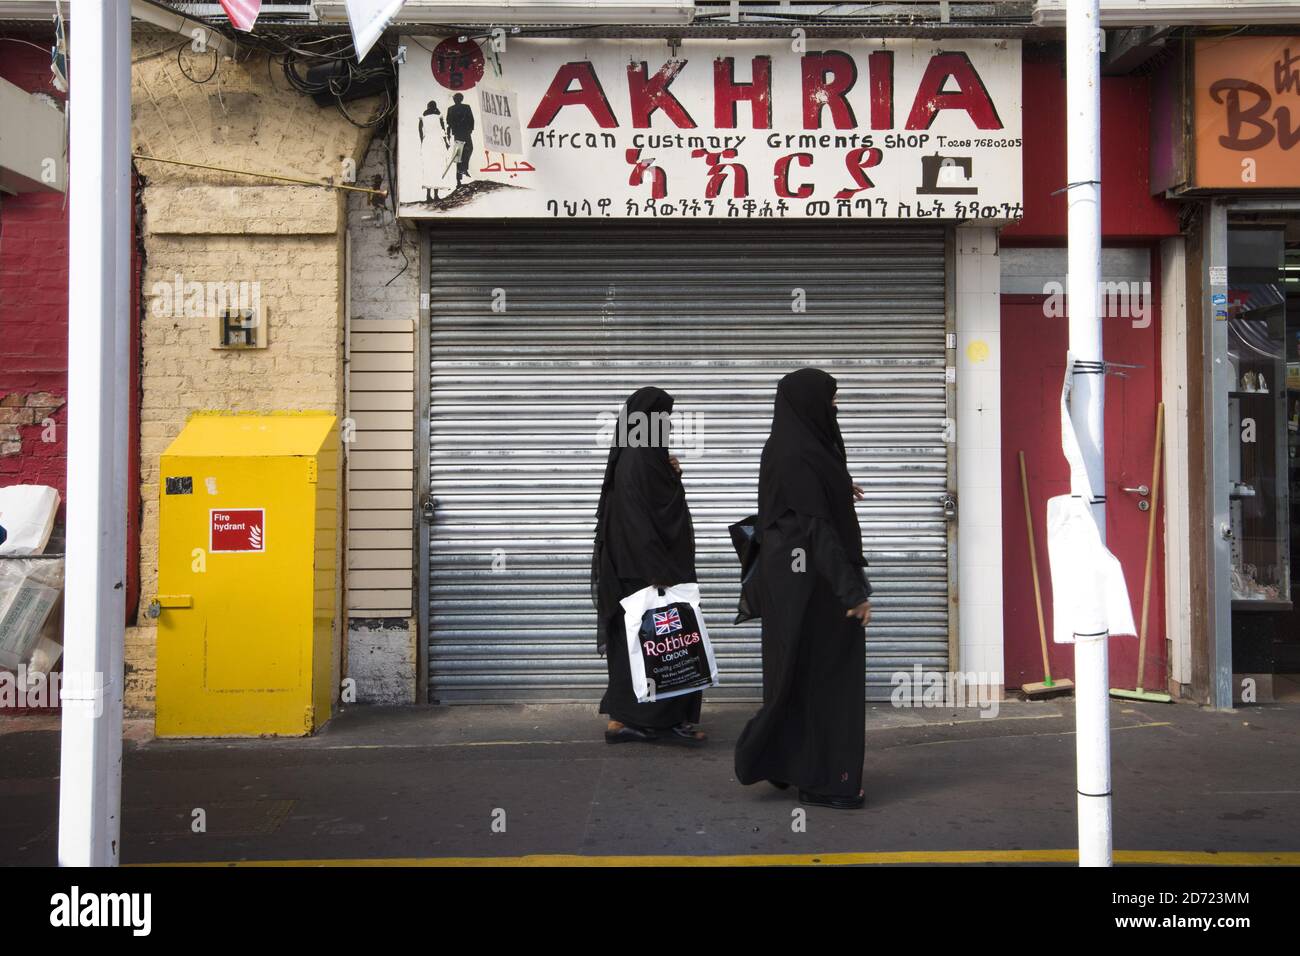 Two muslim women walk past an African clothes store in Shepherd's Bush market in west London. The market sells a multicultural mix of Indian, Polish, African and Caribbean goods. September 30th will mark 100 days since the UK voted to leave the EU, during which time reported anti-immigrant hate crimes have increased. Stock Photo